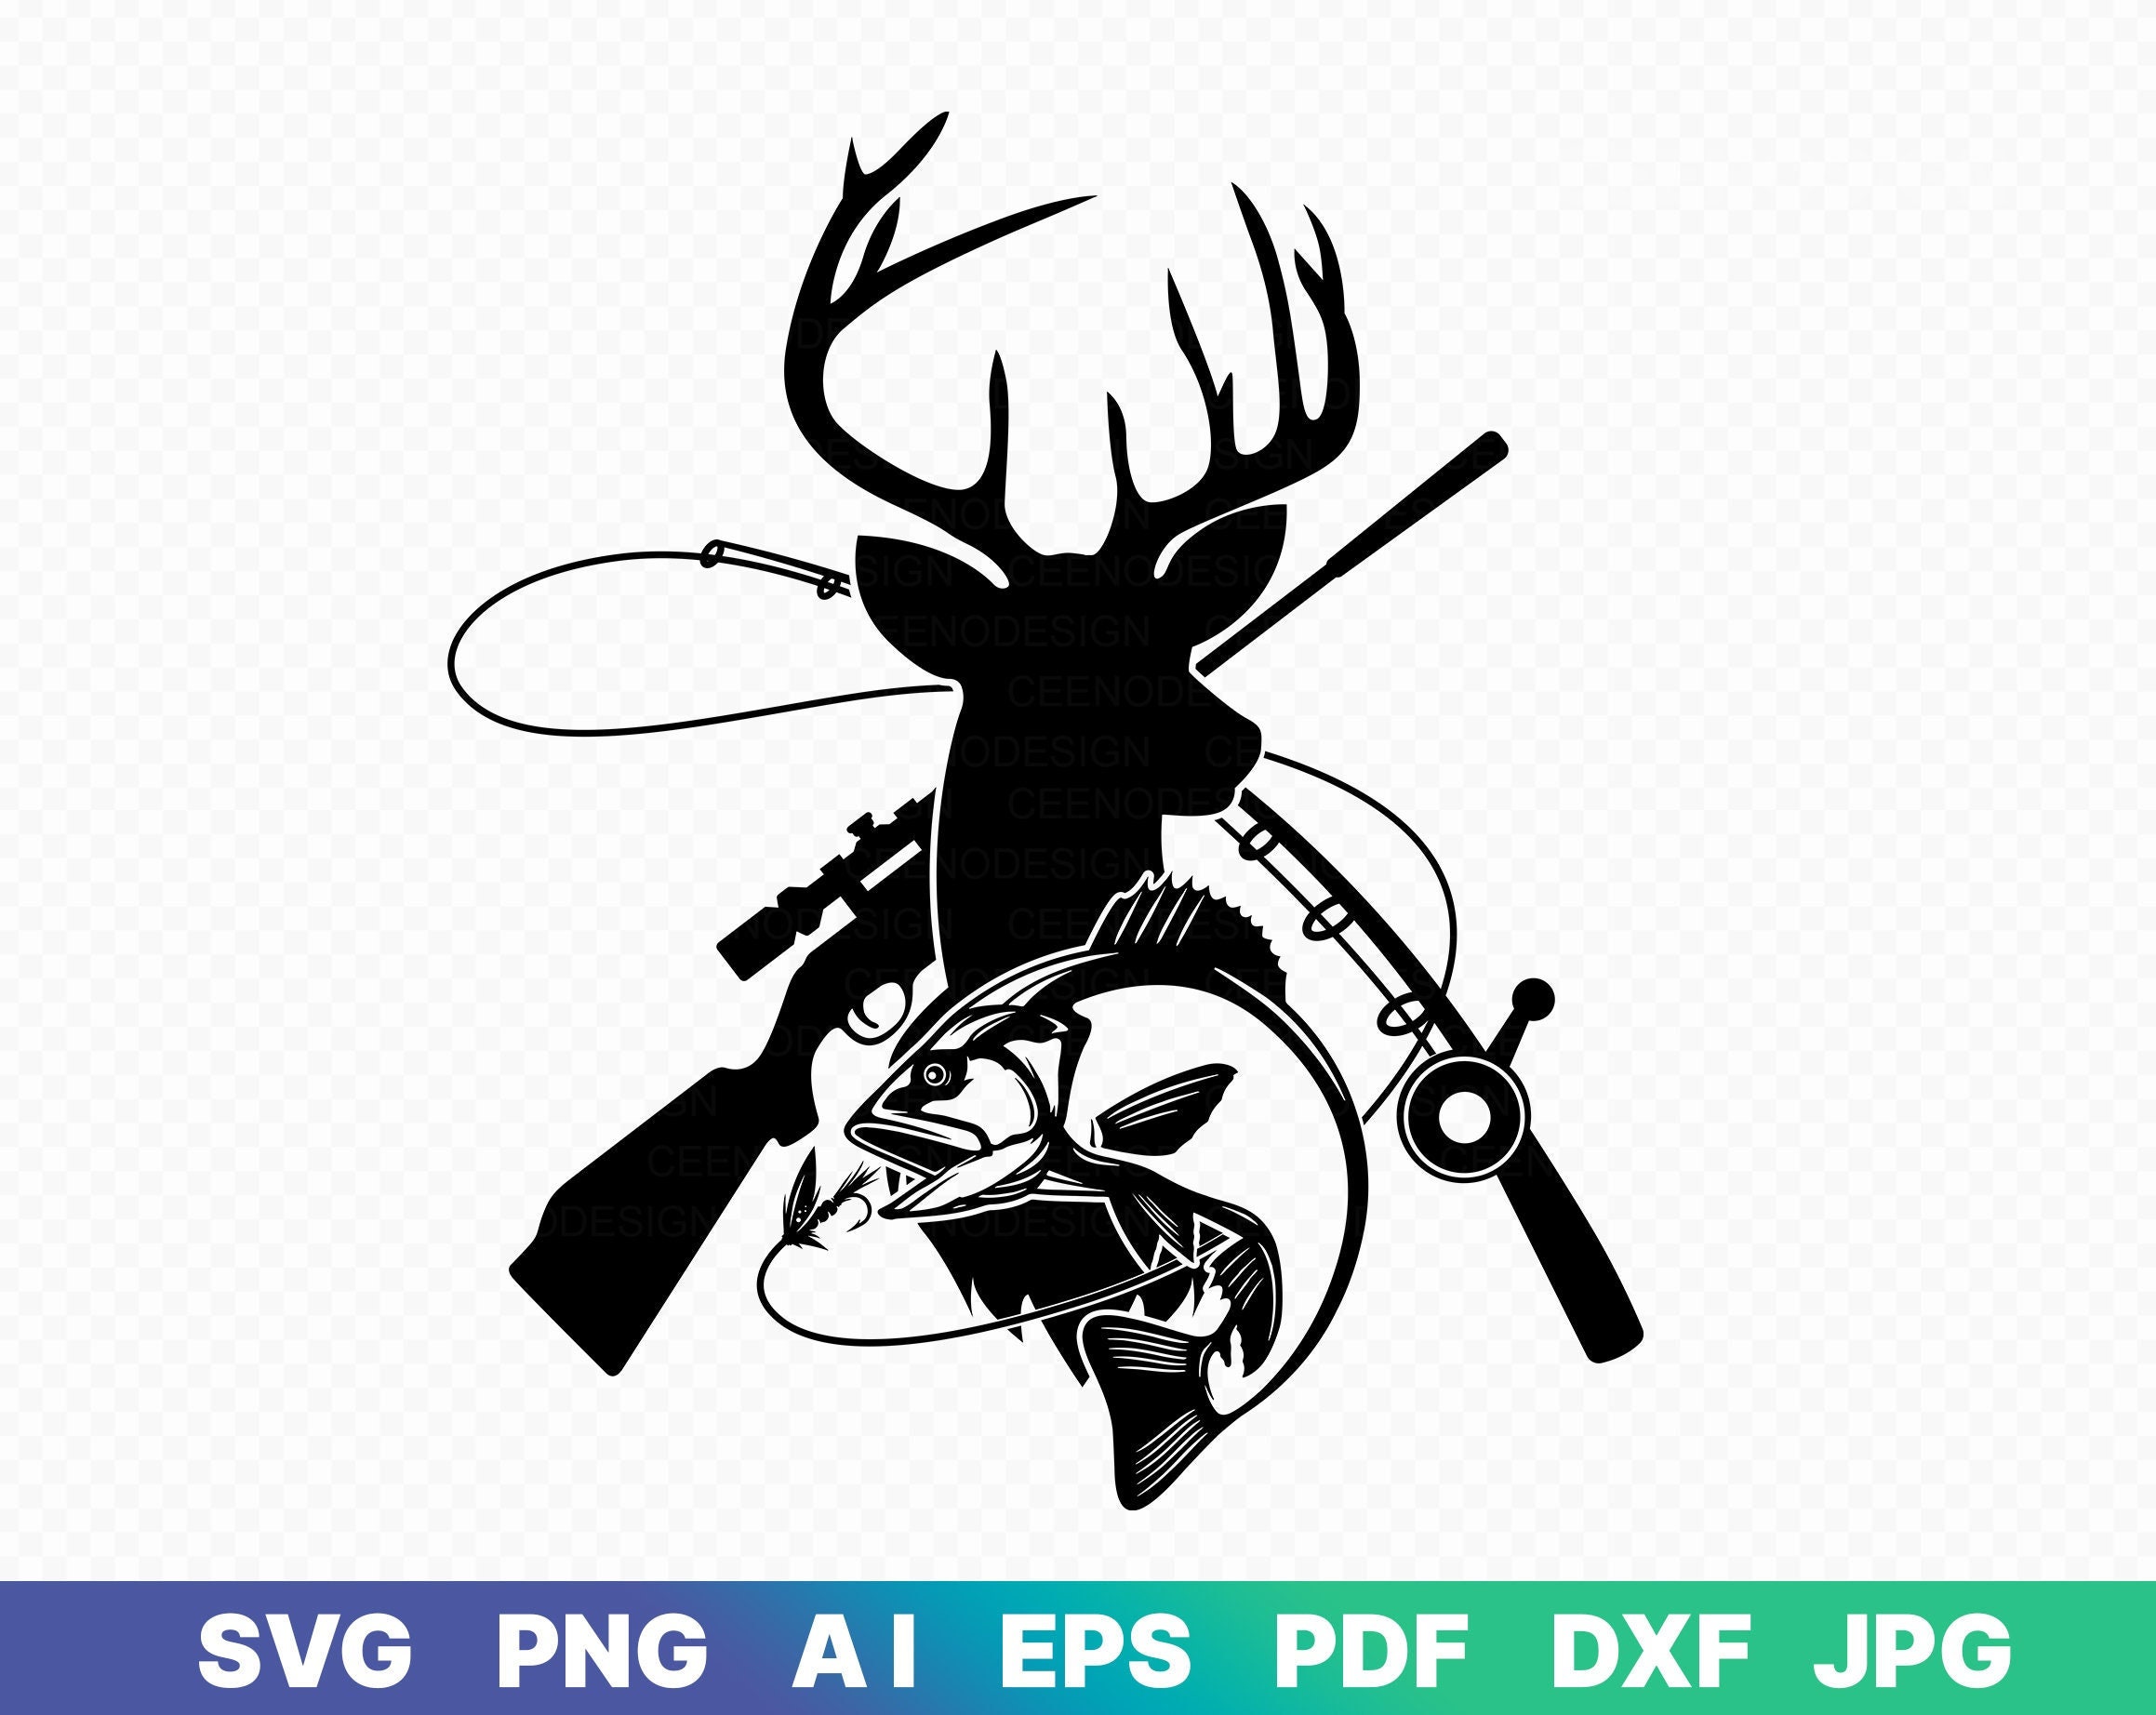 Fishing Pole Instant Digital Download Svg, Png, Dxf, and Eps Files Included  Bobber, Fishing Rod 